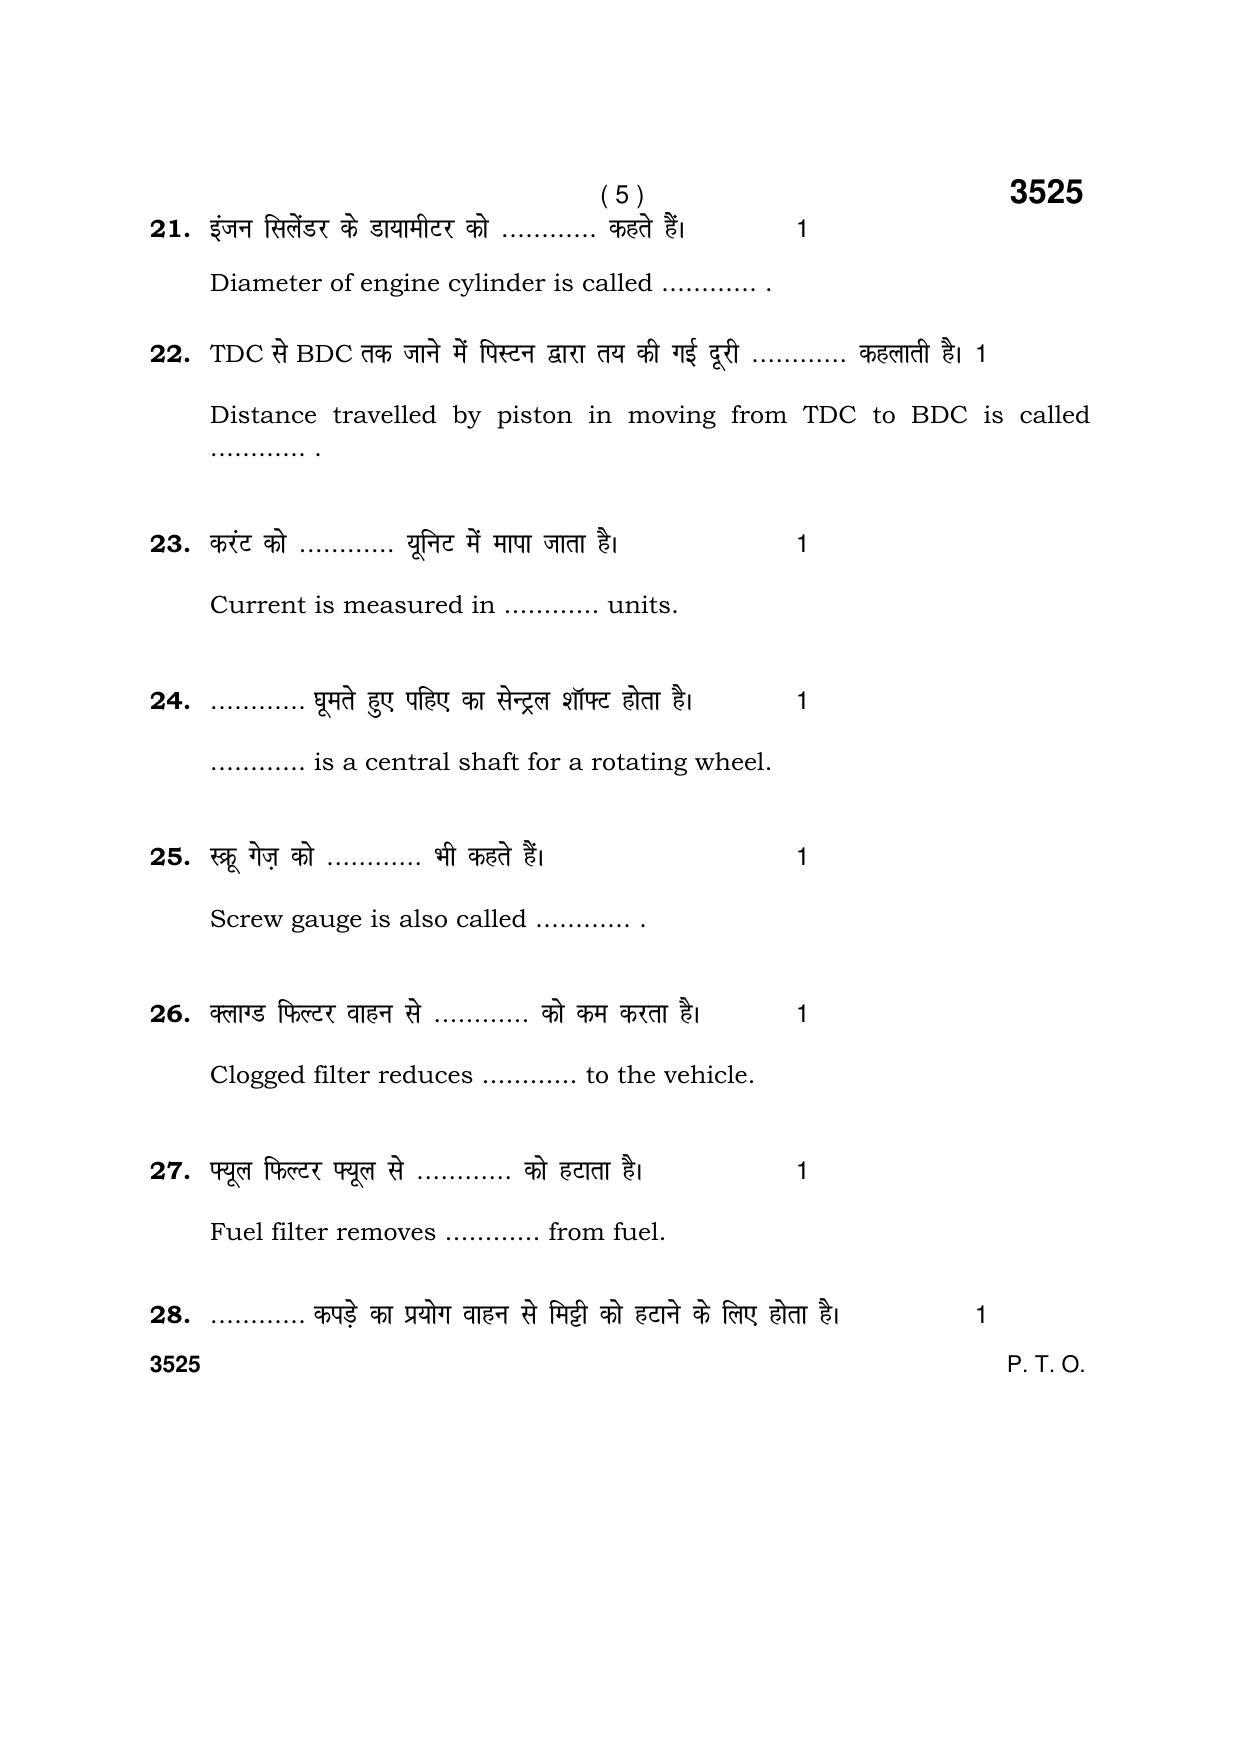 Haryana Board HBSE Class 10 Automobile 2018 Question Paper - Page 5